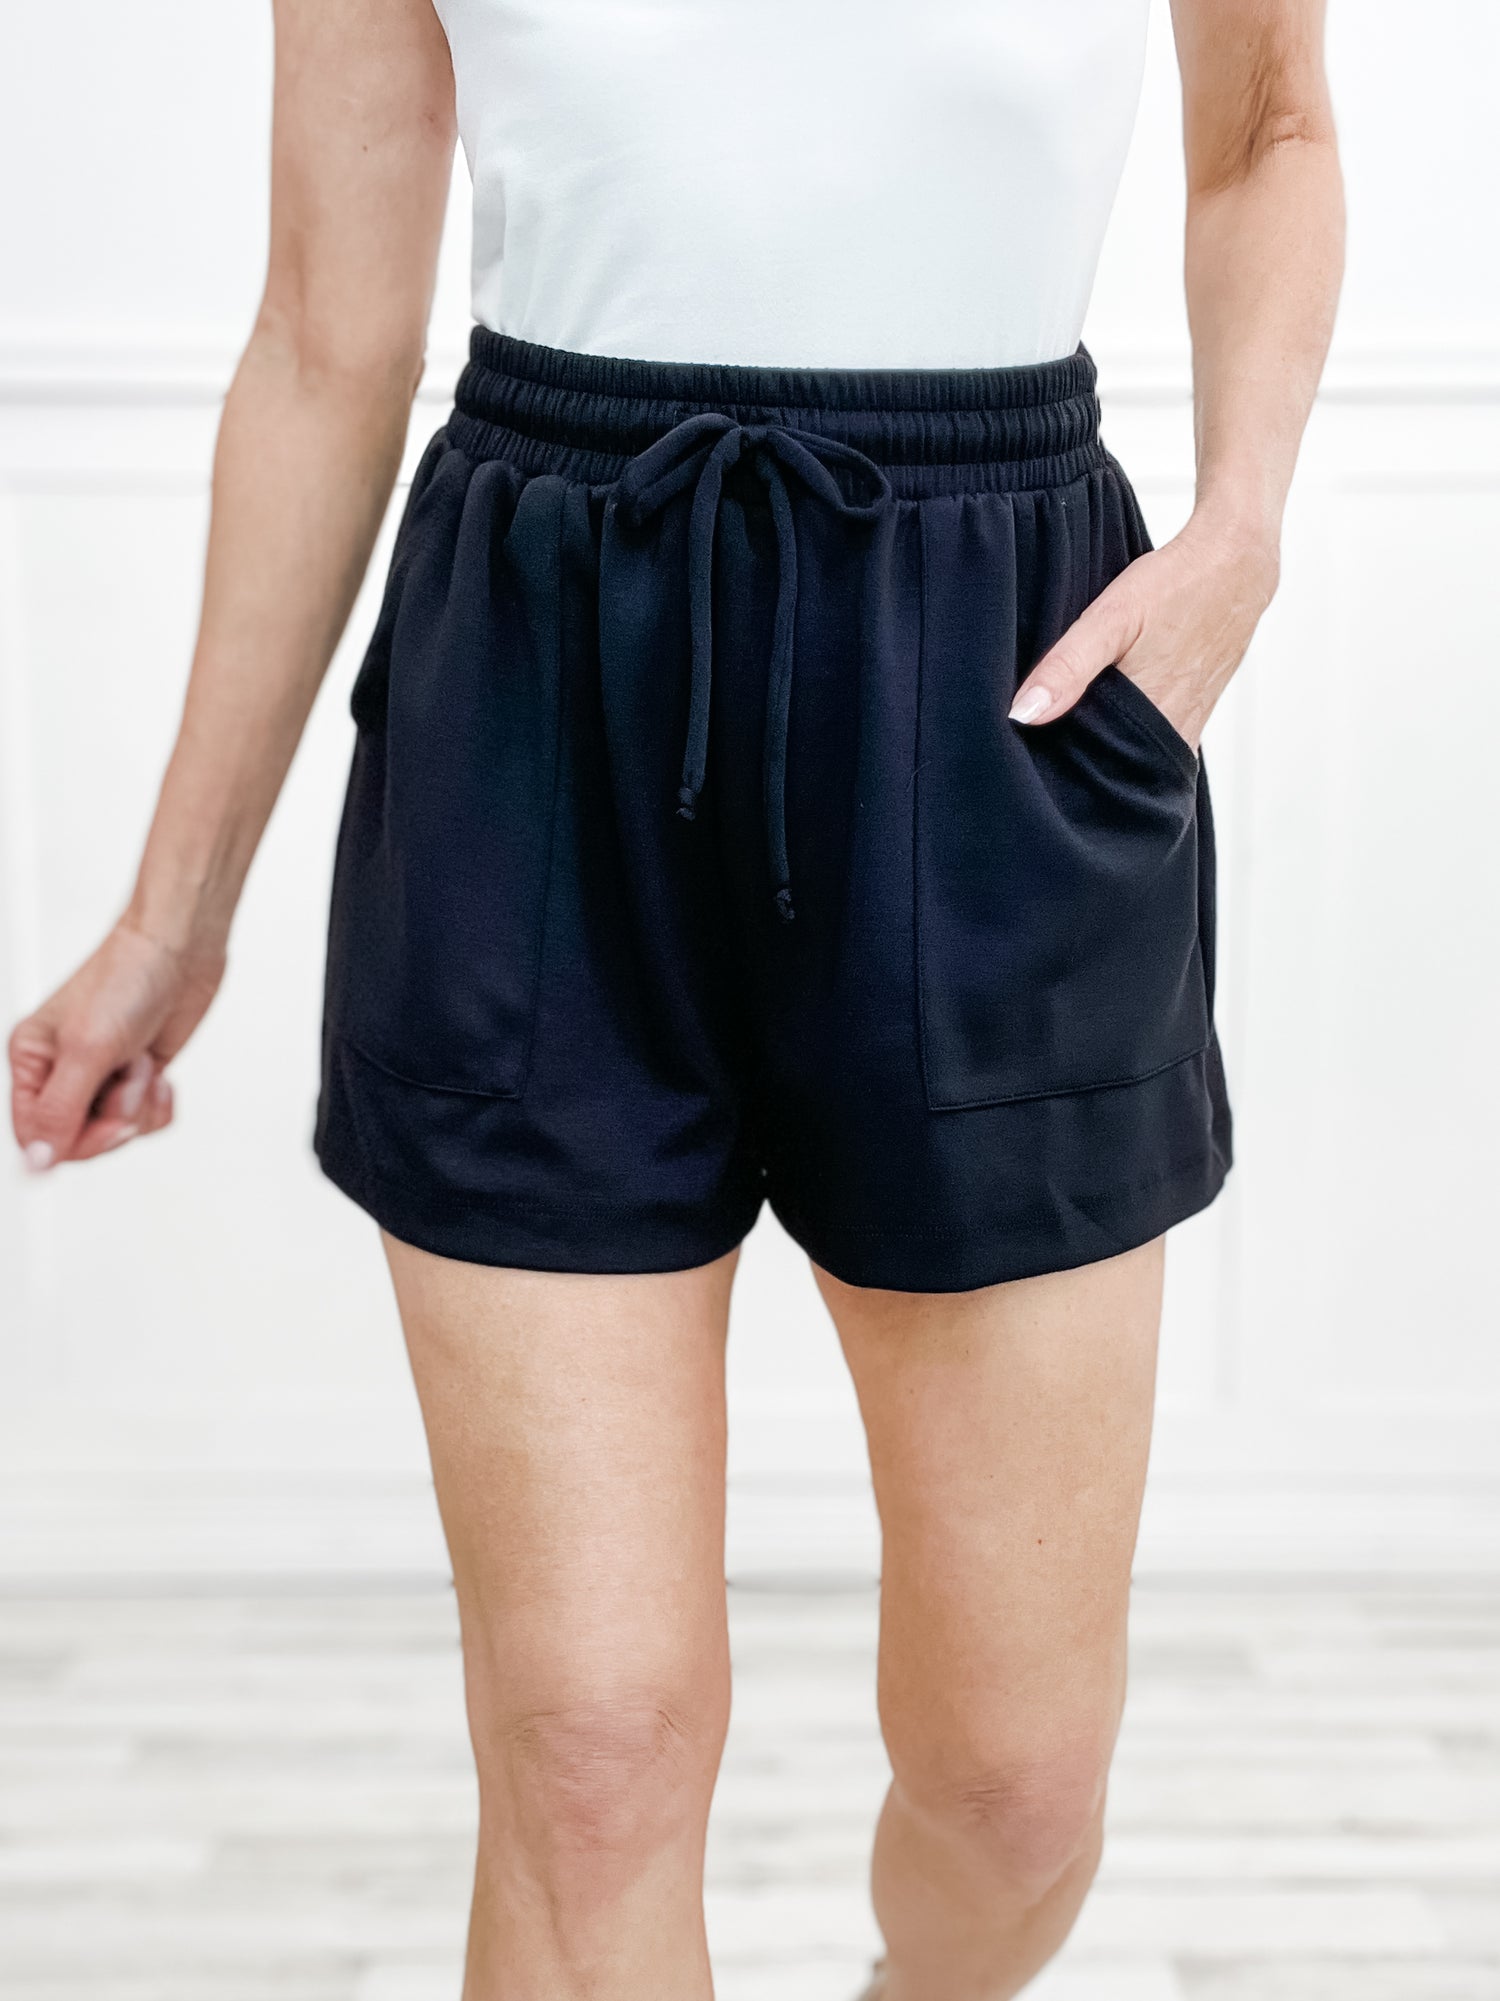 Easy Stride High-Waisted Knit Shorts